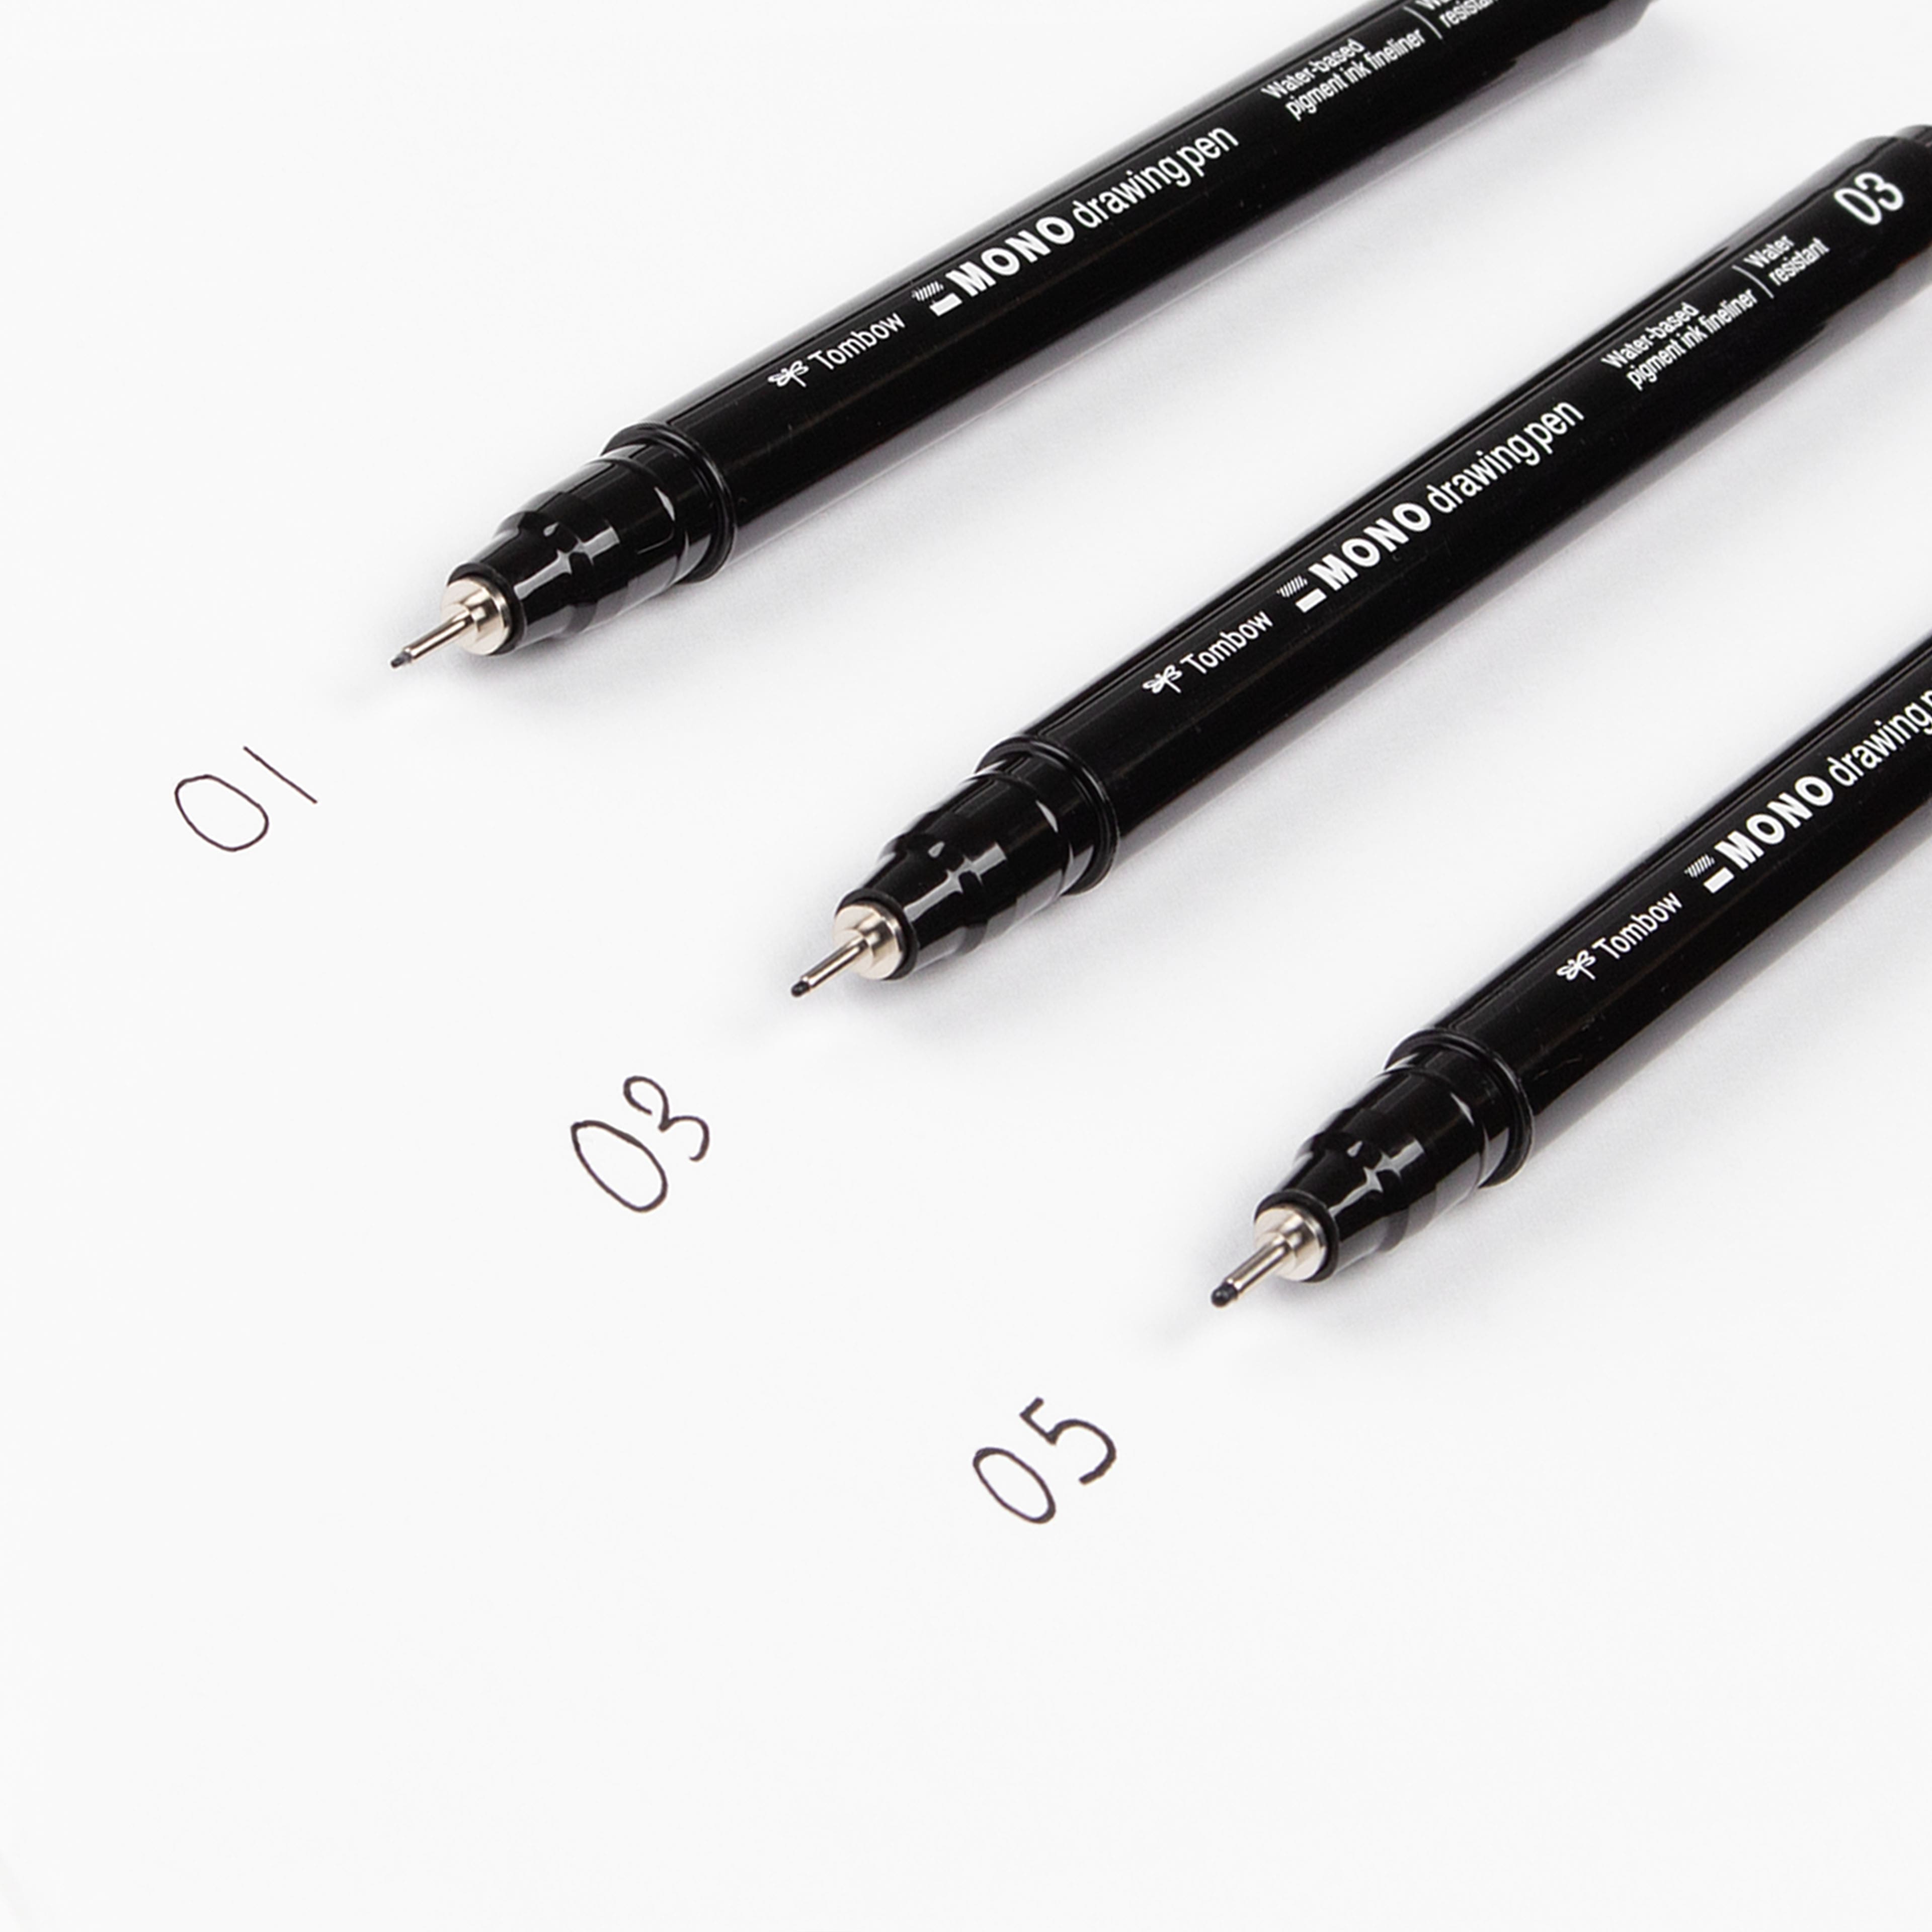 Tombow Mono Drawing Pen Review — The Pen Addict